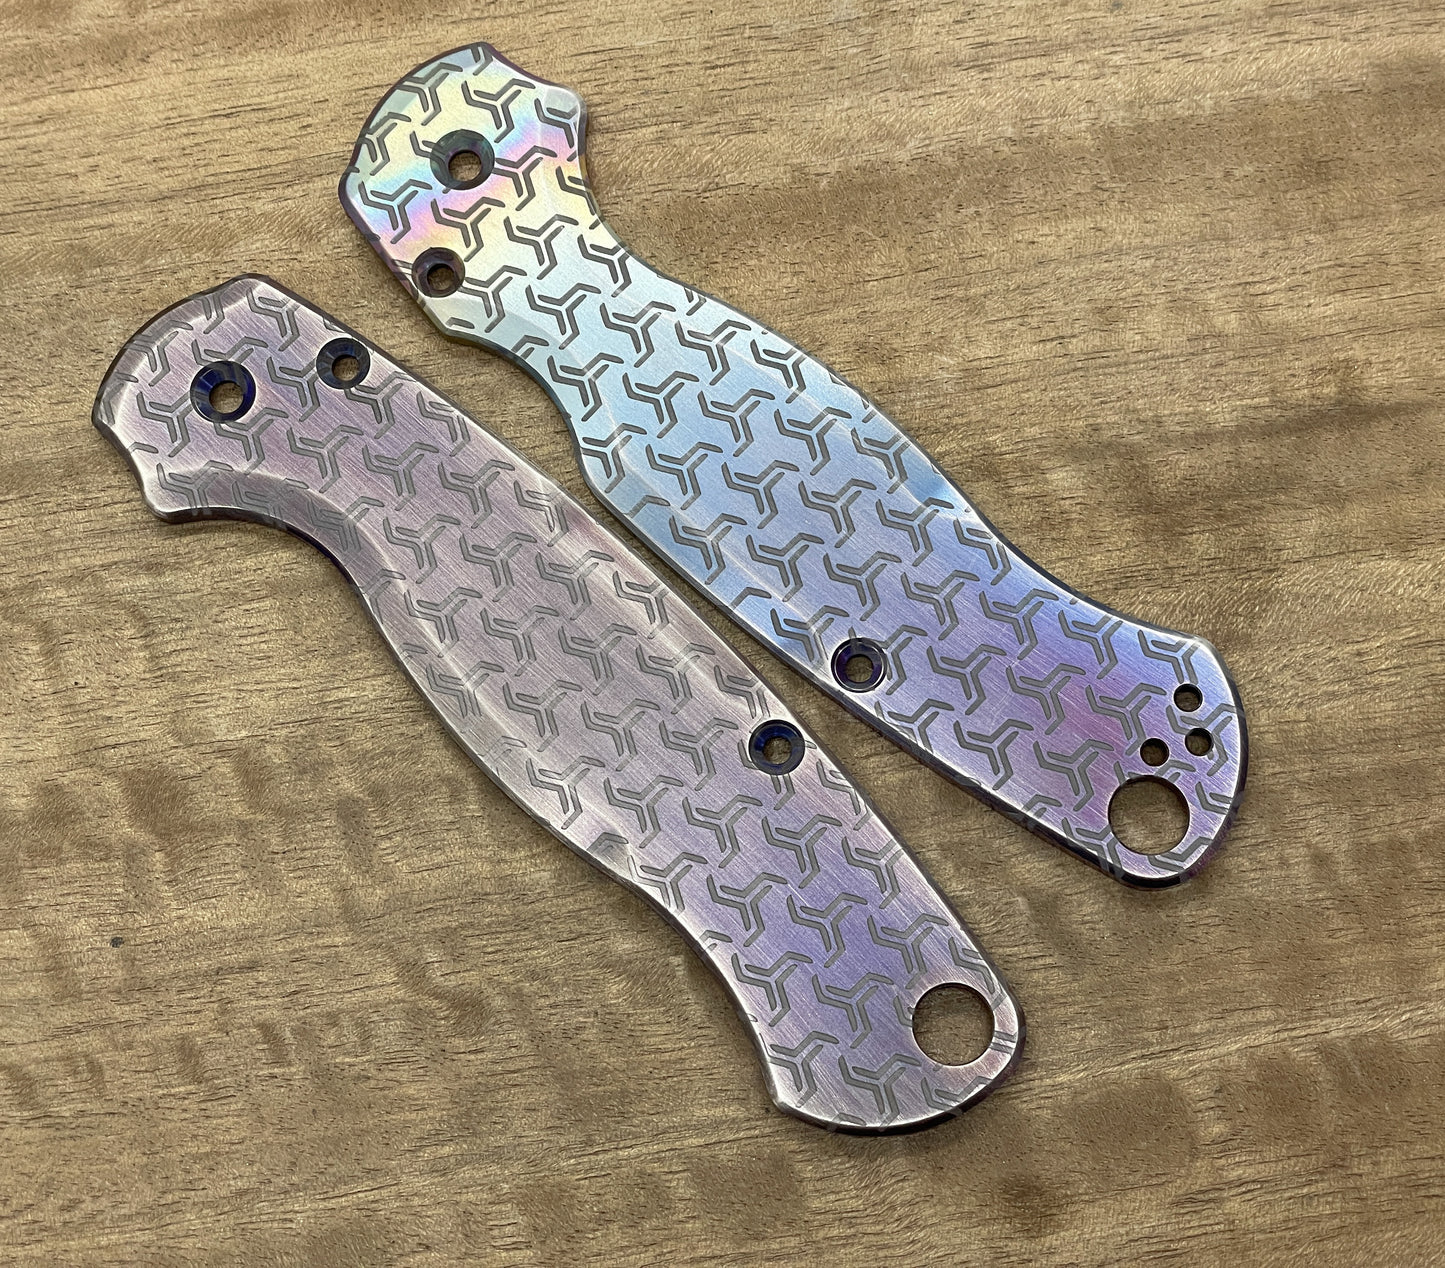 TURBO Flamed Titanium scales for Spyderco Paramilitary 2 PM2